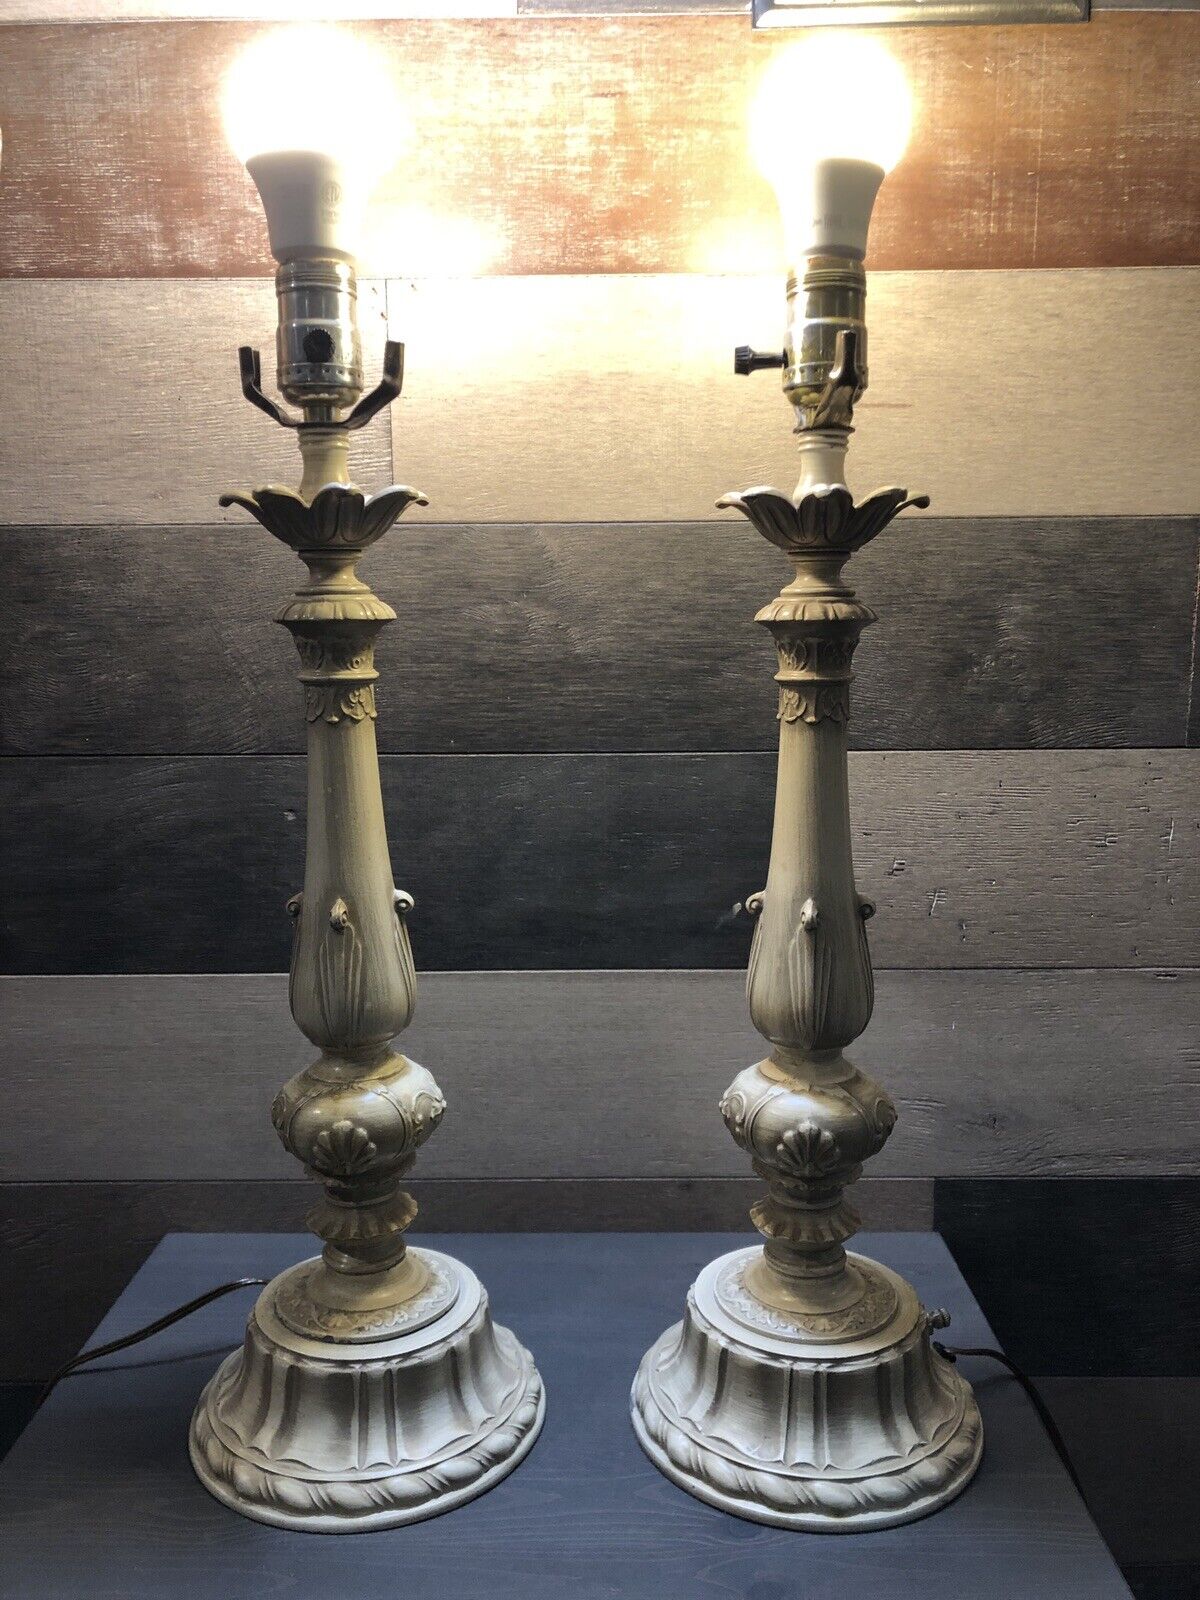 GORGEOUS Pair of Vintage Cream Extra Tall Lamps  